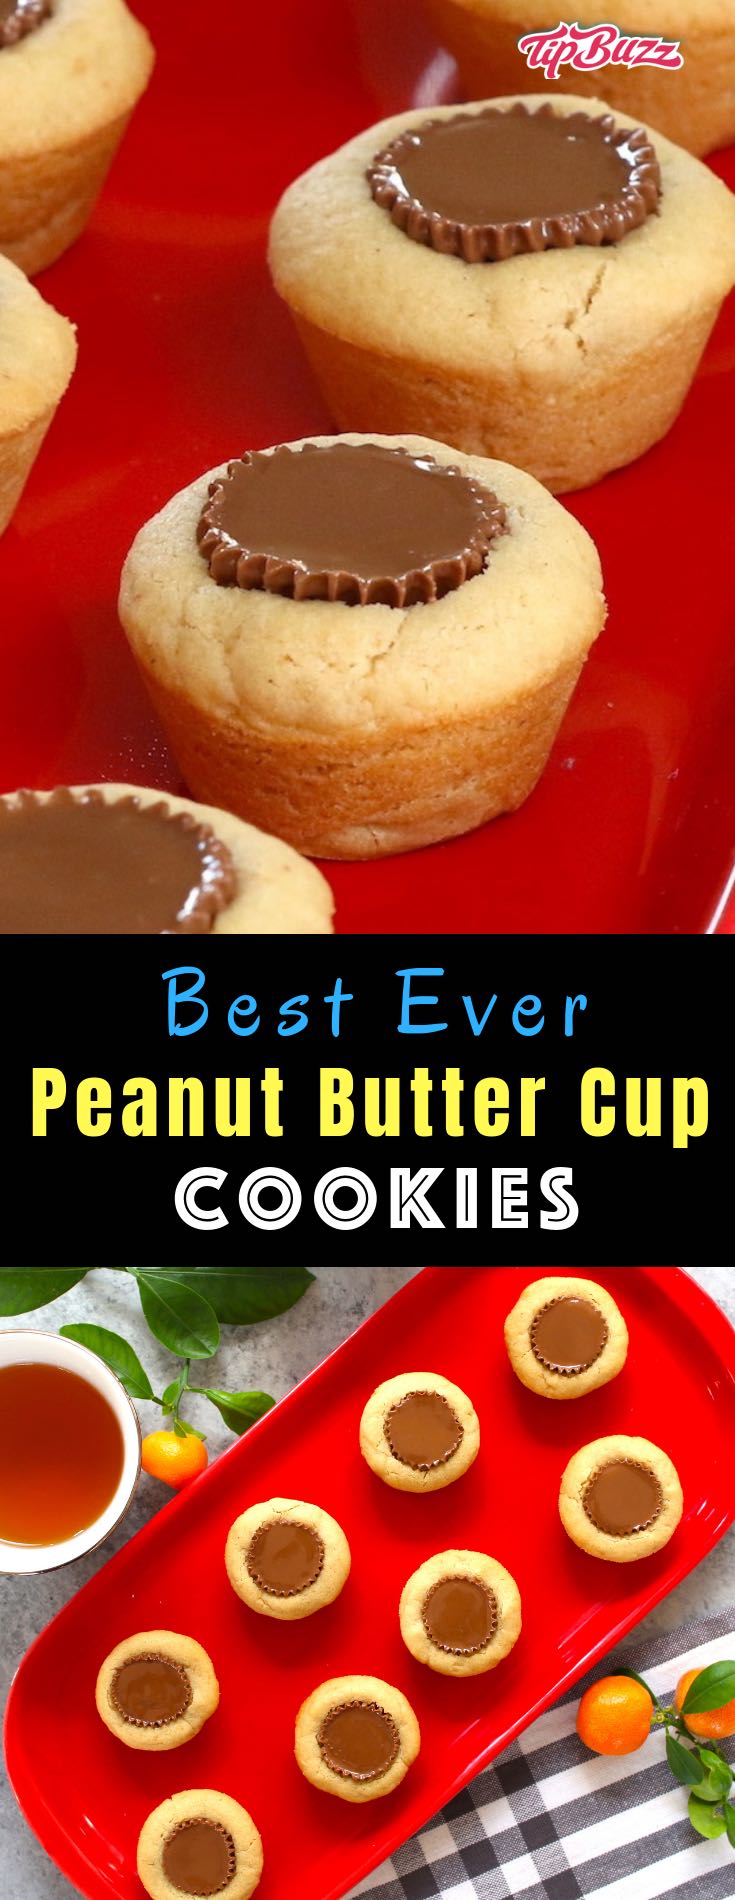 Peanut Butter Cup Cookies are chewy and melt-in-your-mouth peanut butter cookies stuffed with a mini Reese’s peanut butter cup. It’s easy to make and great for special occasions such as Christmas. 